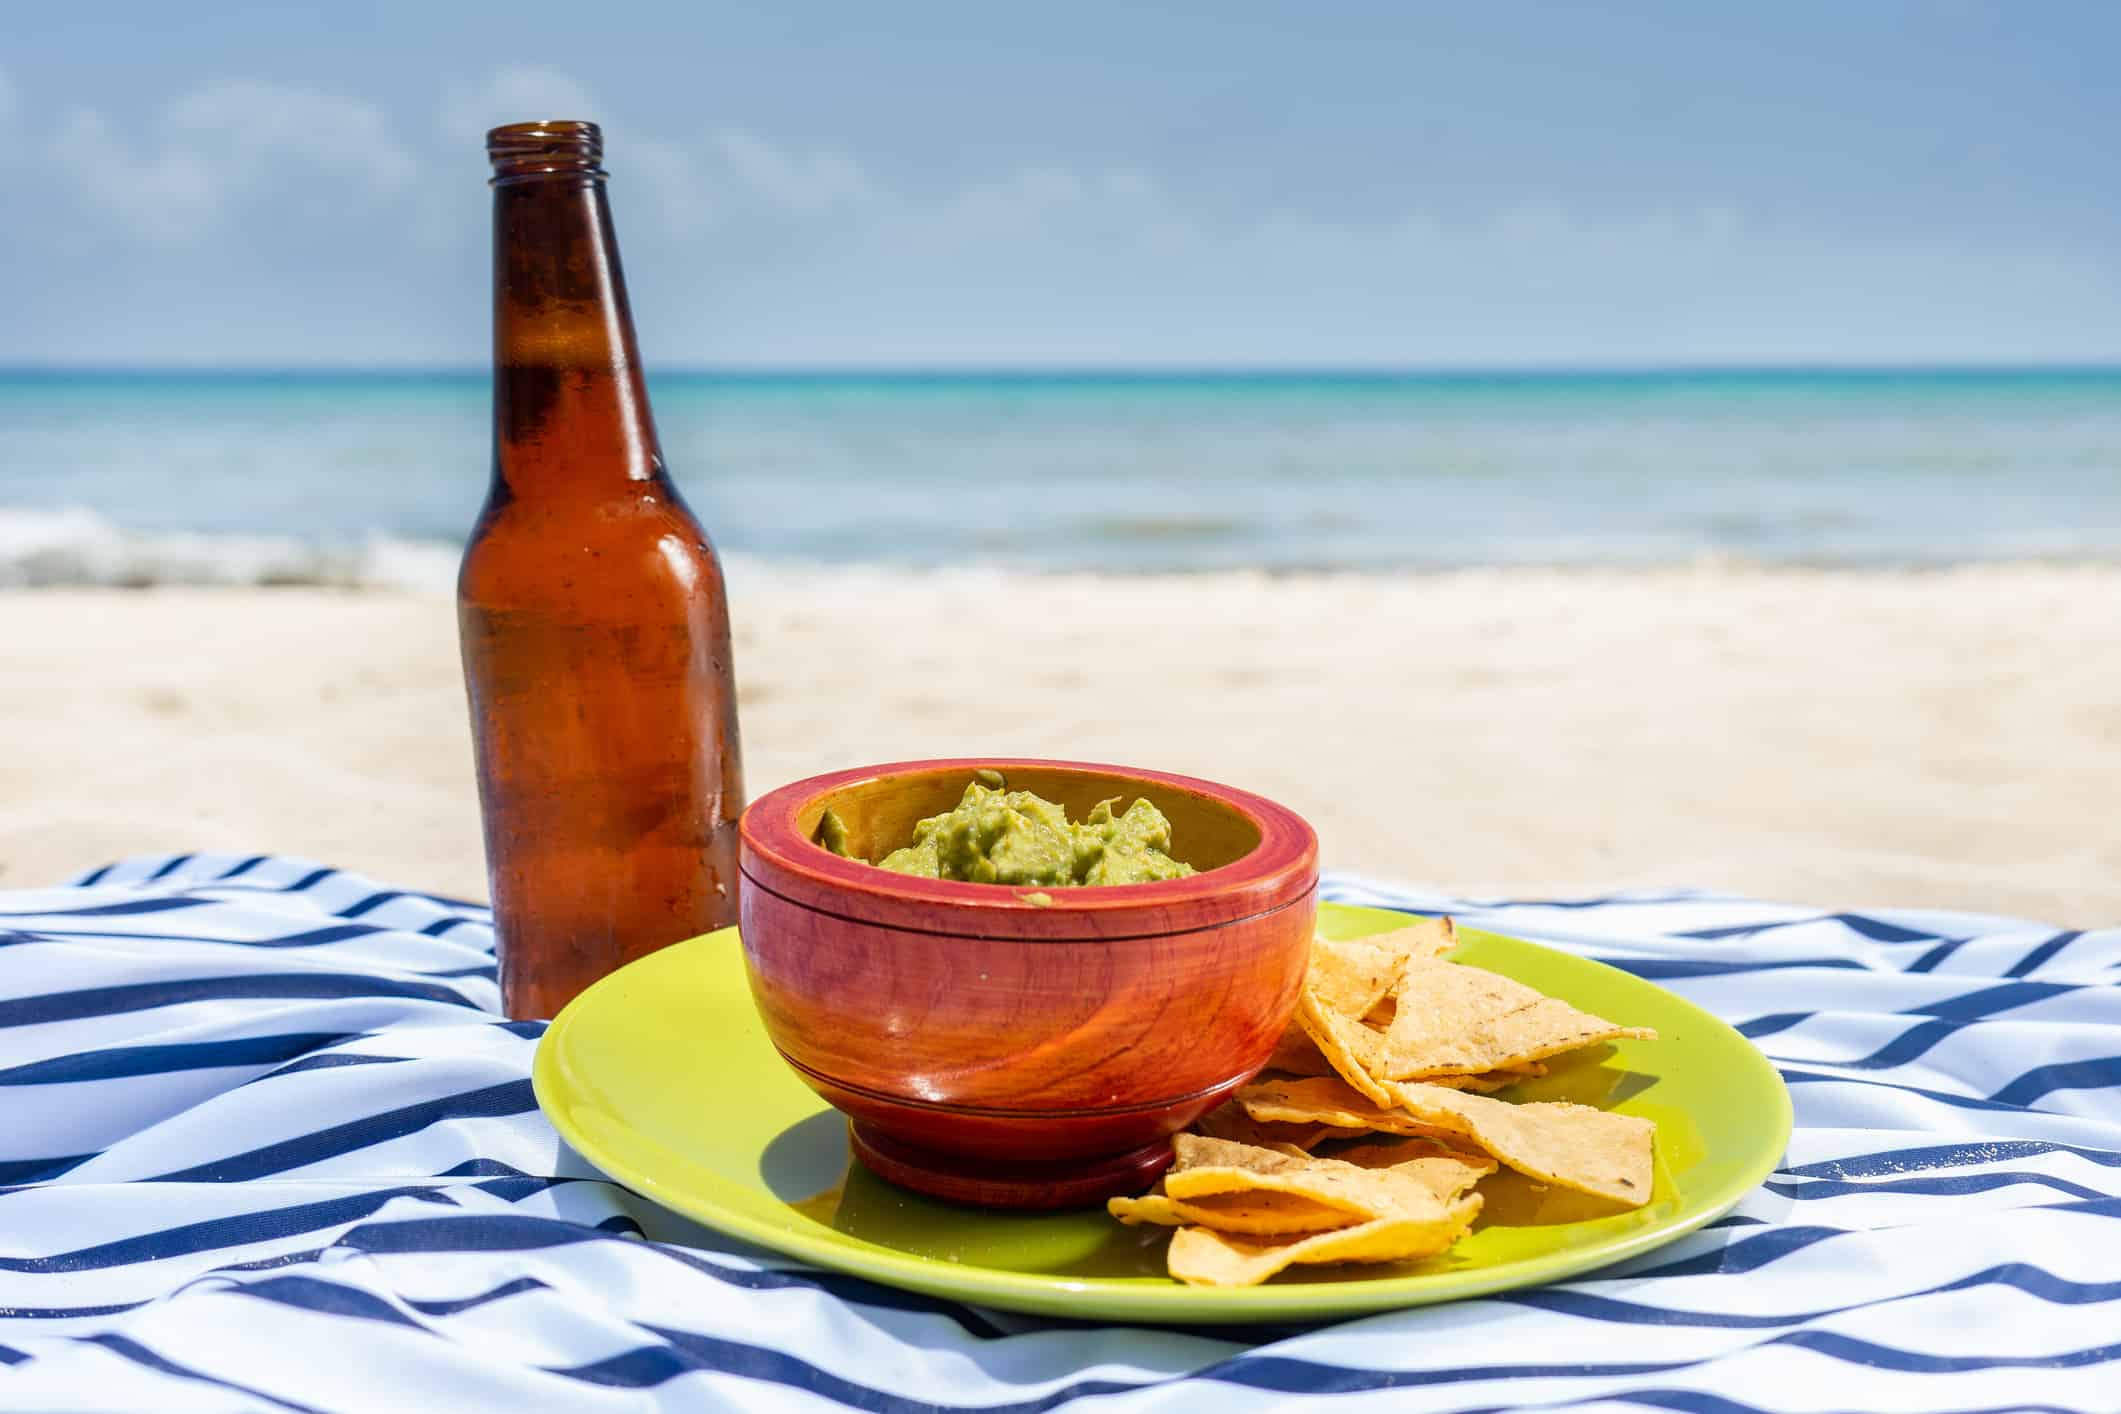 Guacamole and beer at the beach